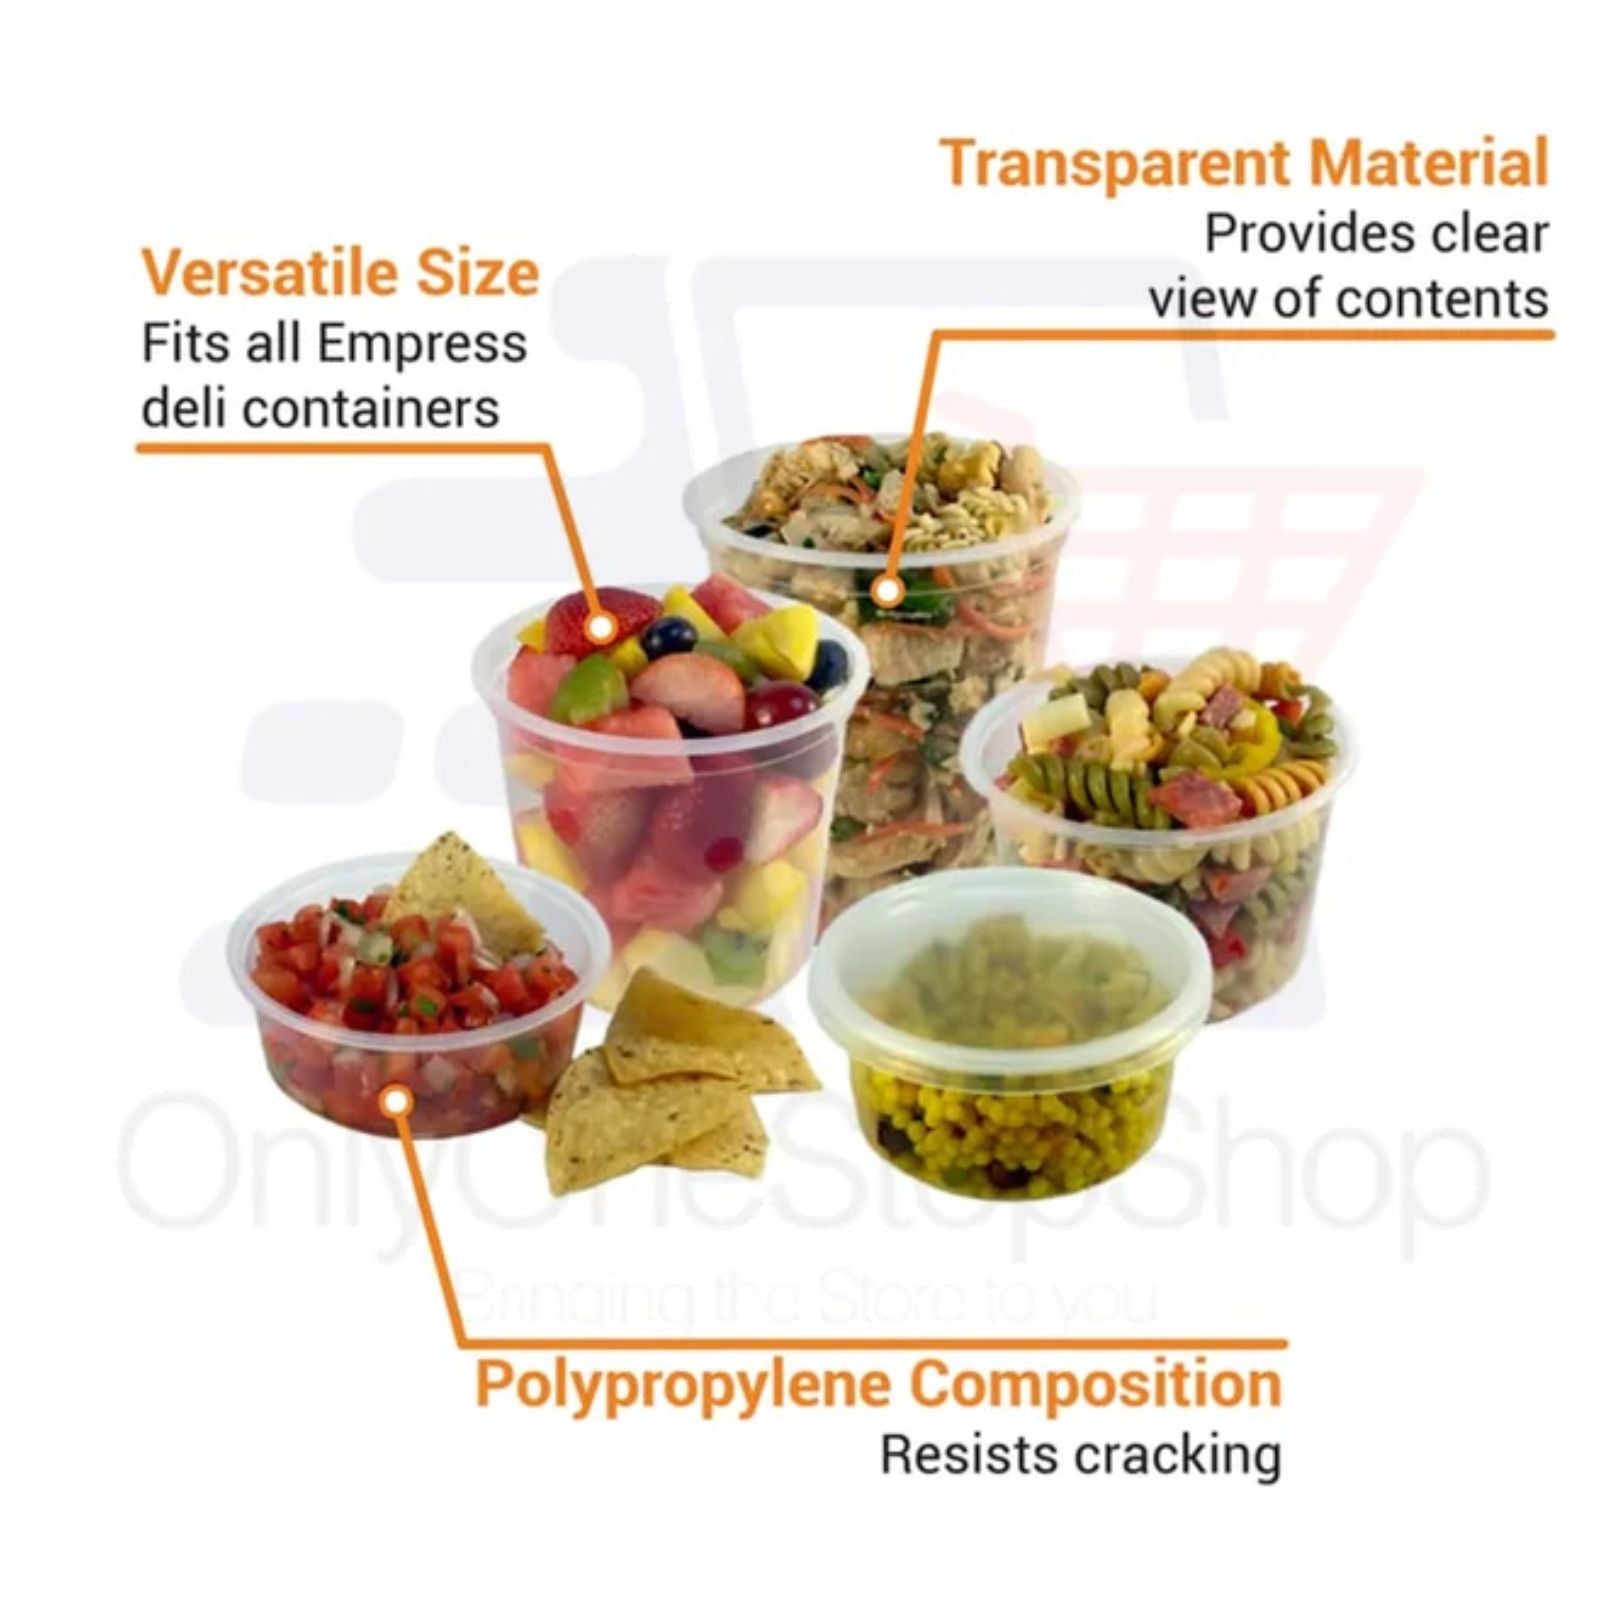 *WHOLESALE* 86oz. Heavyweight Deli Containers with Lids | 200 ct/case Food Storage & Serving VeZee   